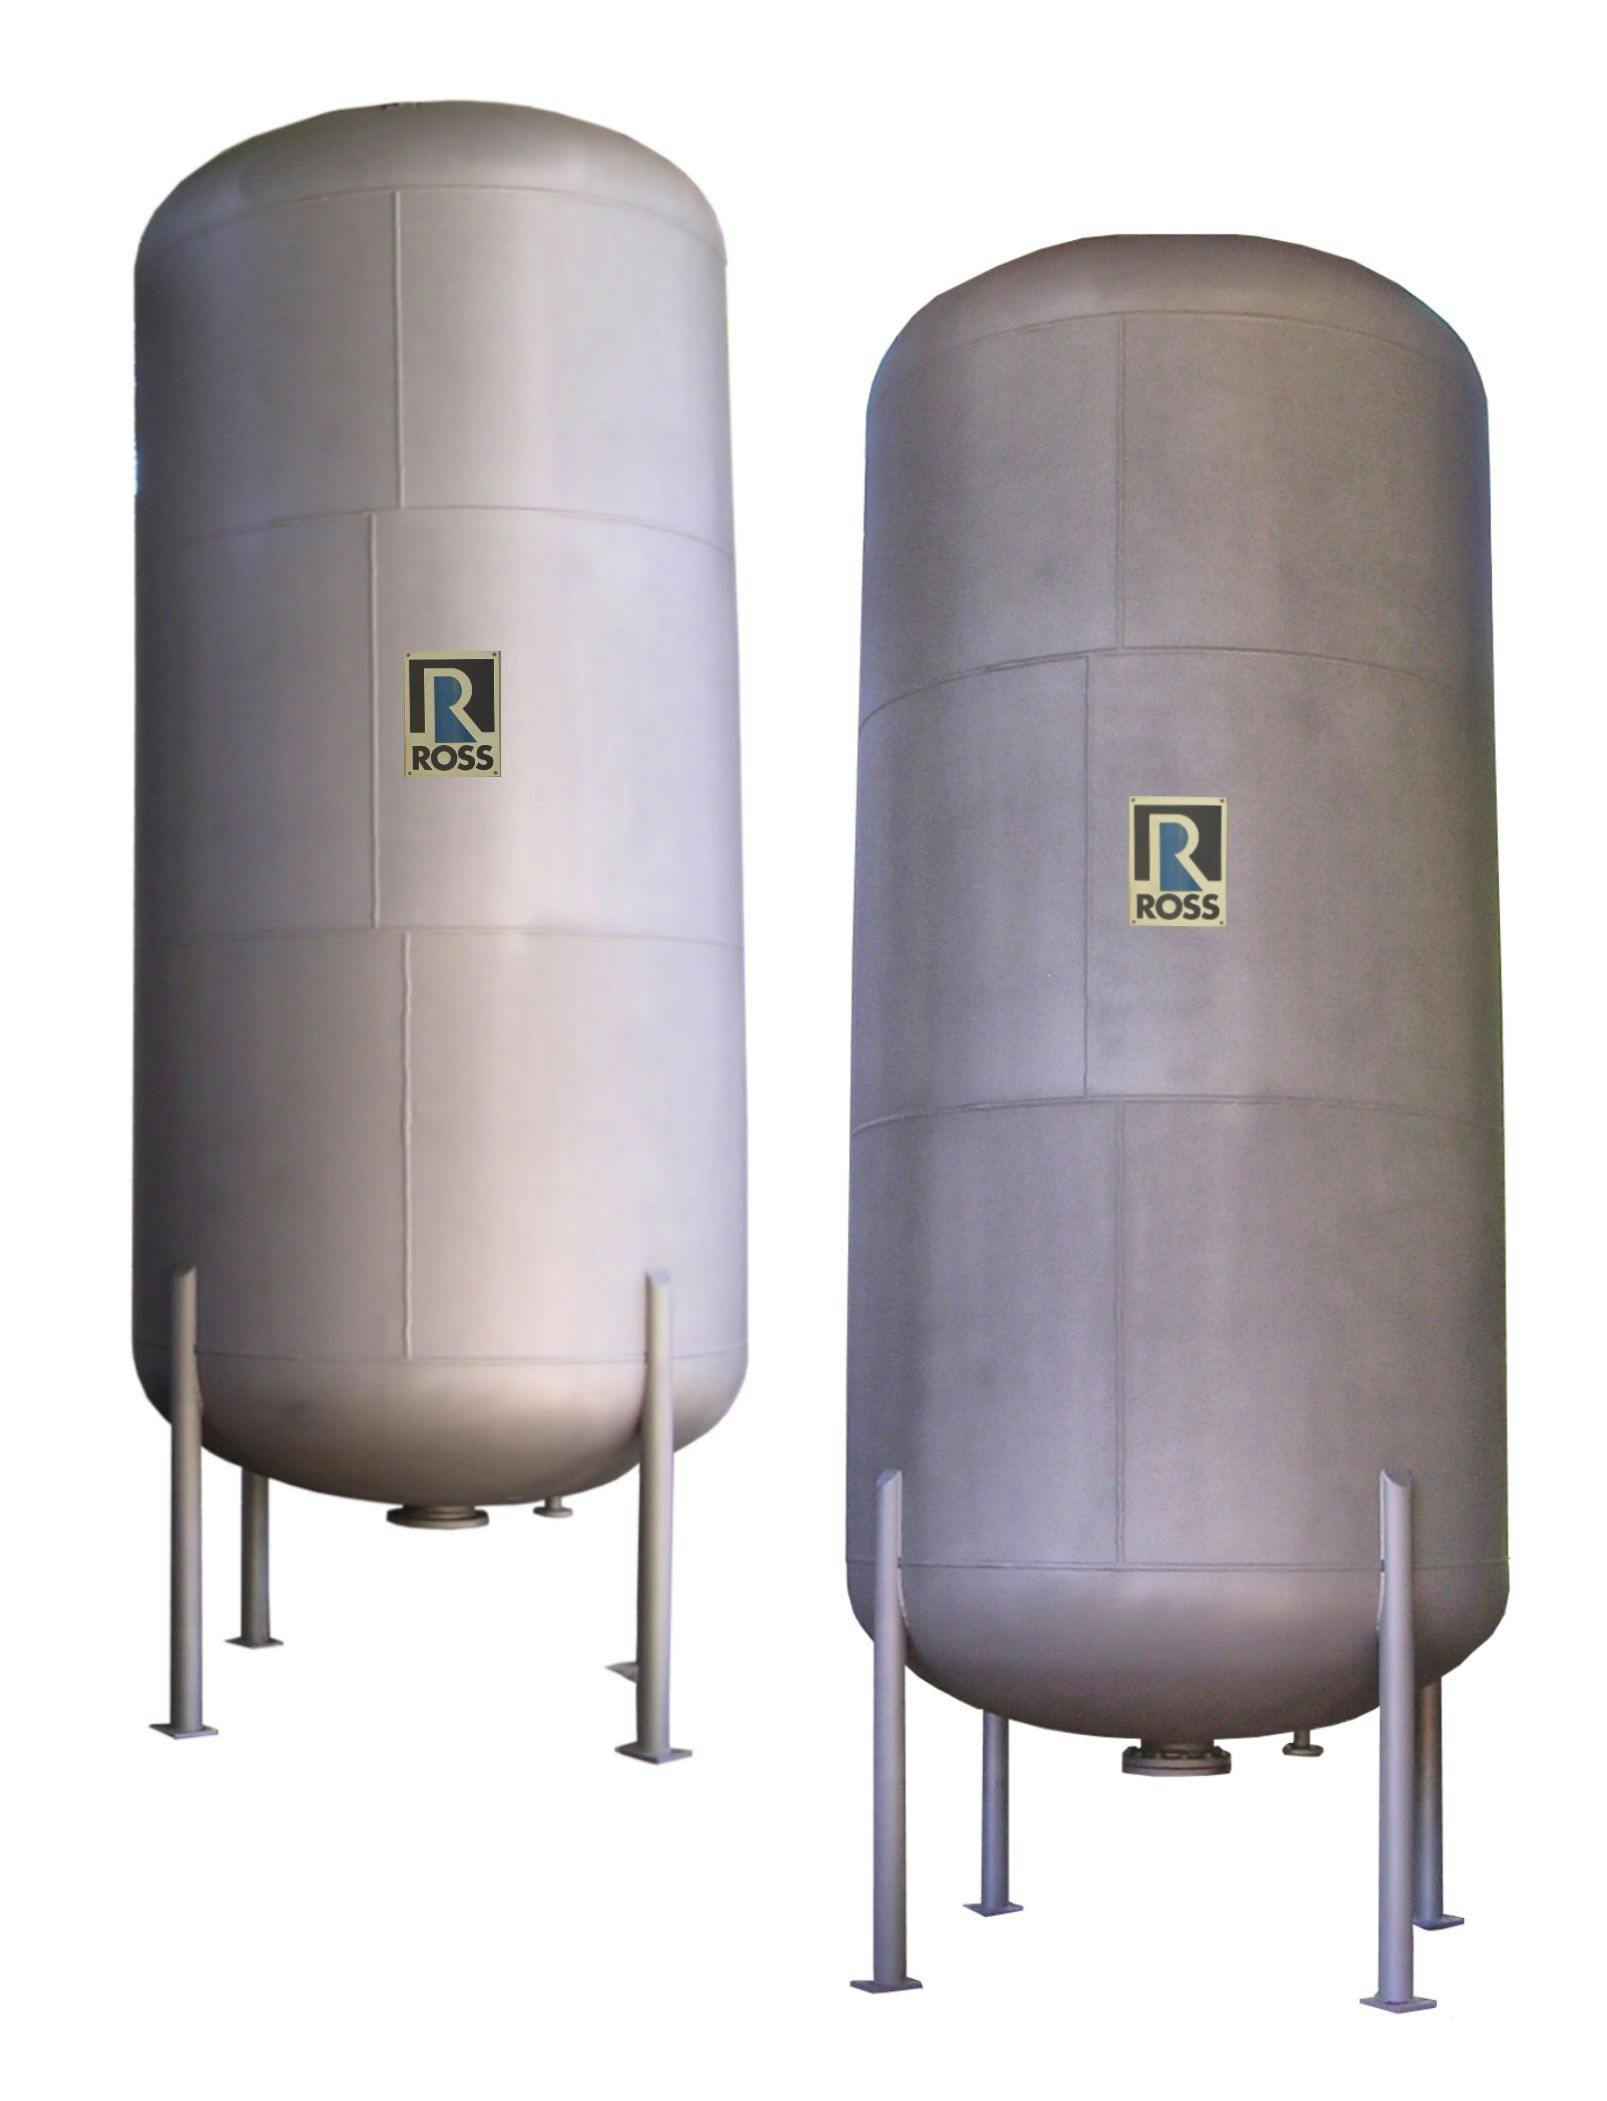 Ross Engineering Offers Large-Scale Carbon Filter Tanks